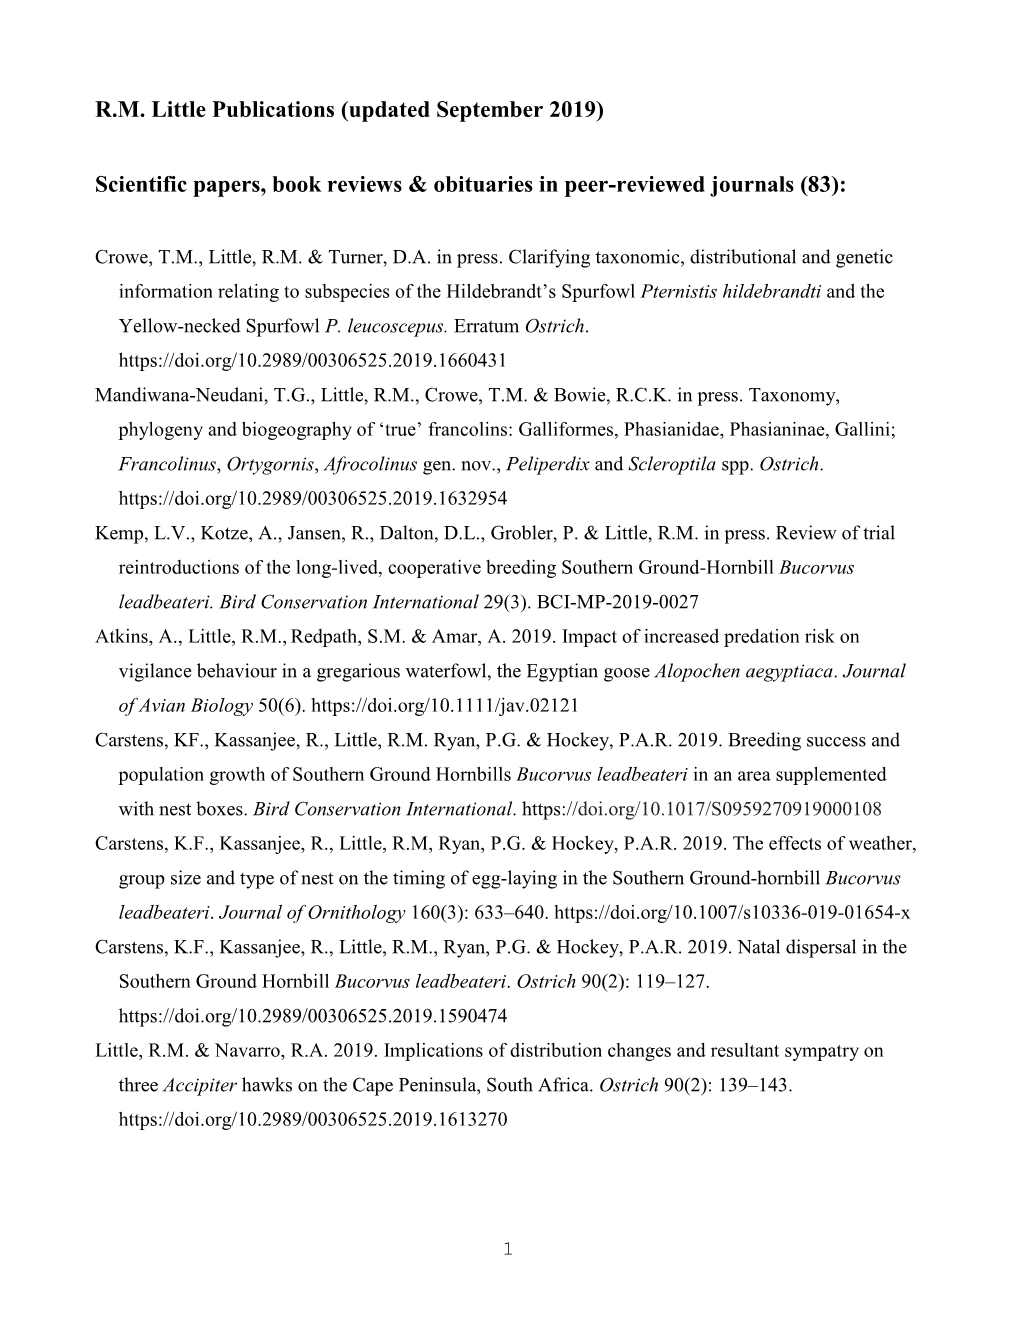 R.M. Little Publications (Updated September 2019) Scientific Papers